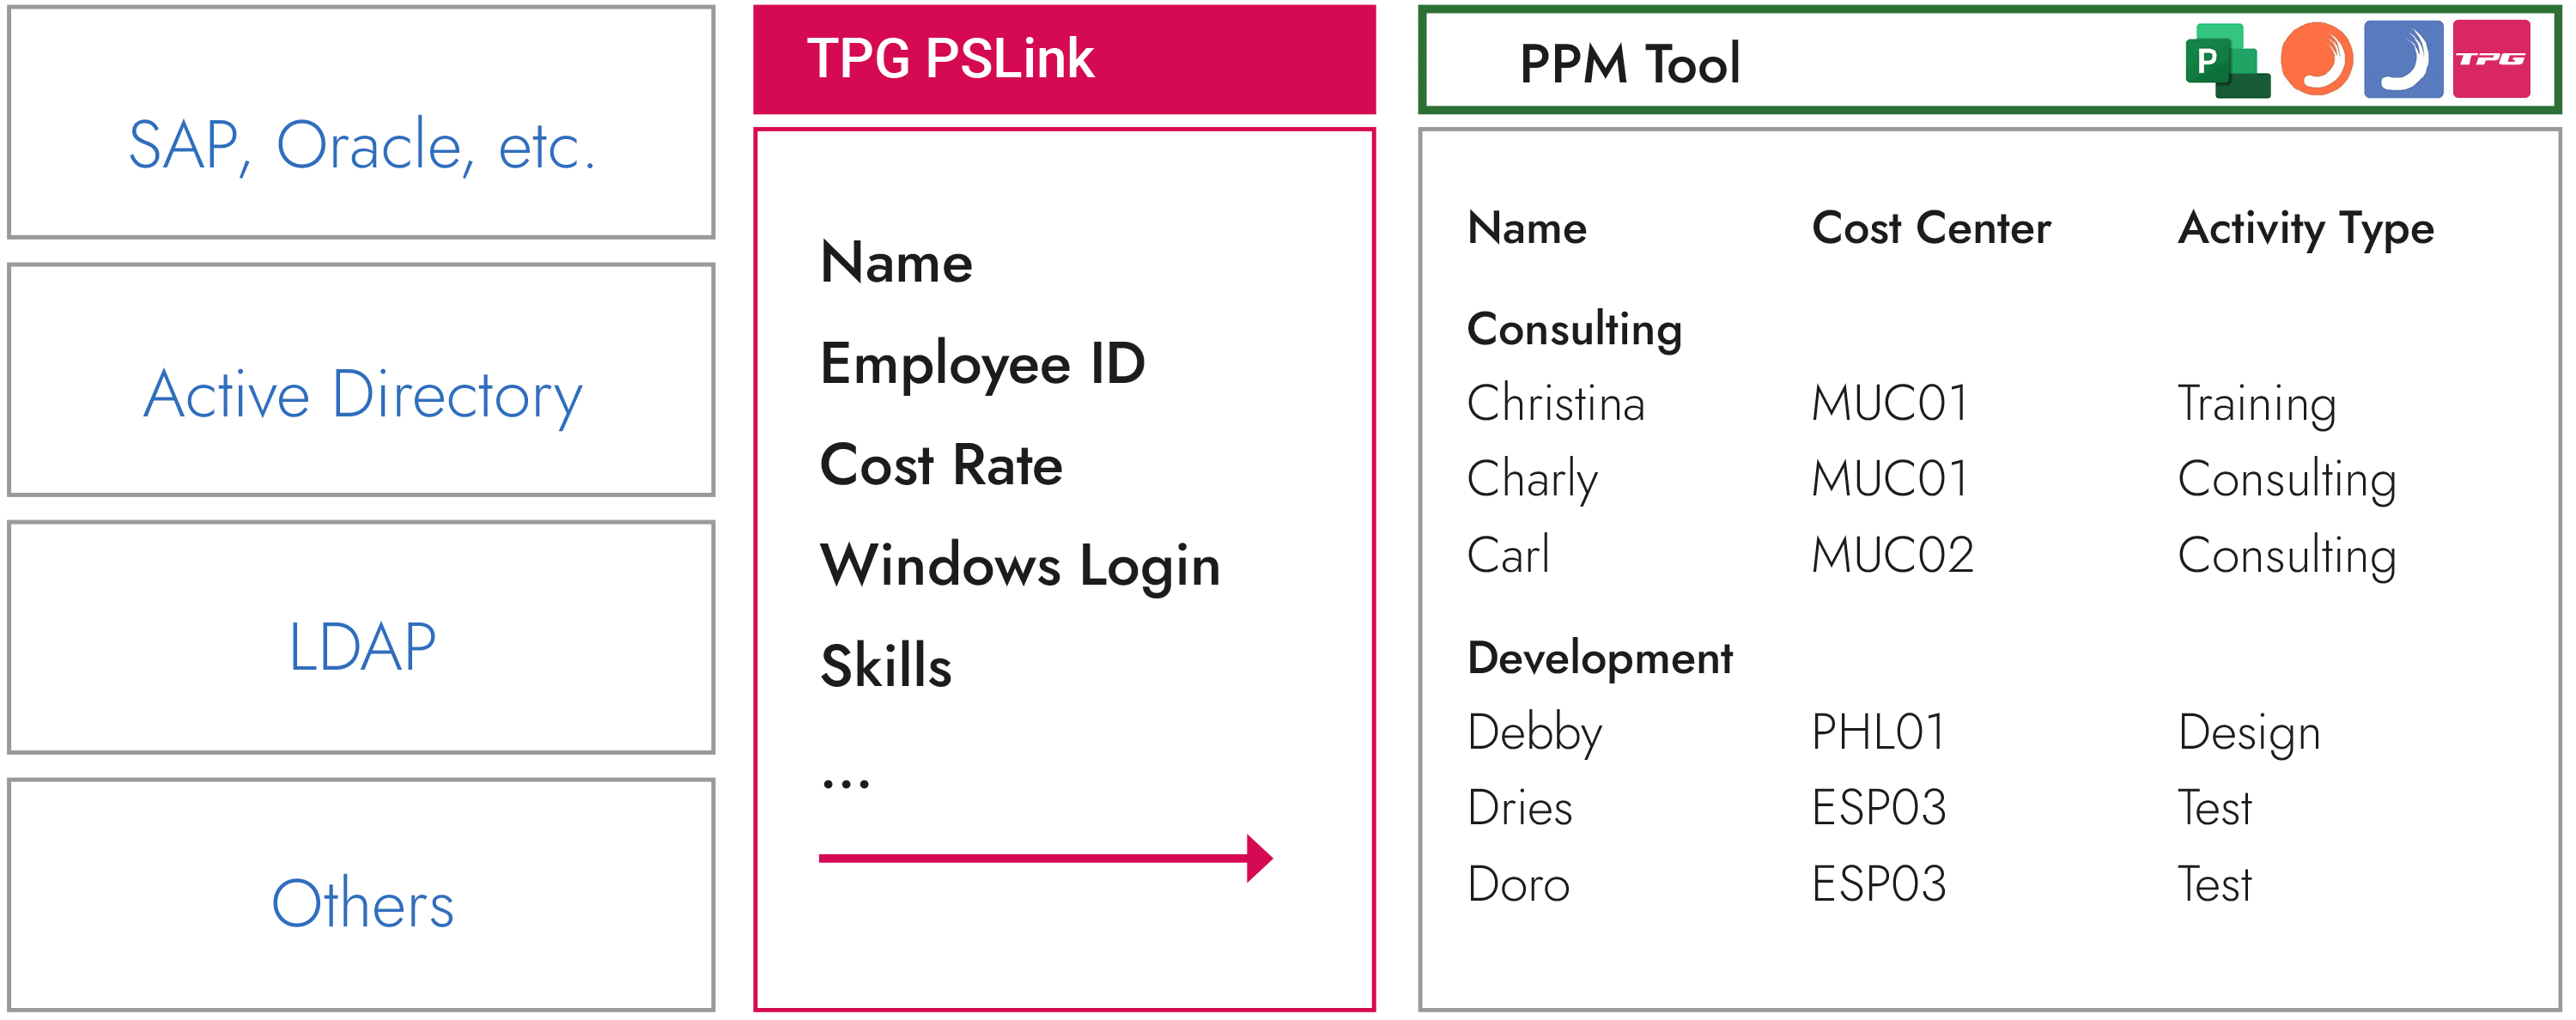 Transfer of resource data to PPM